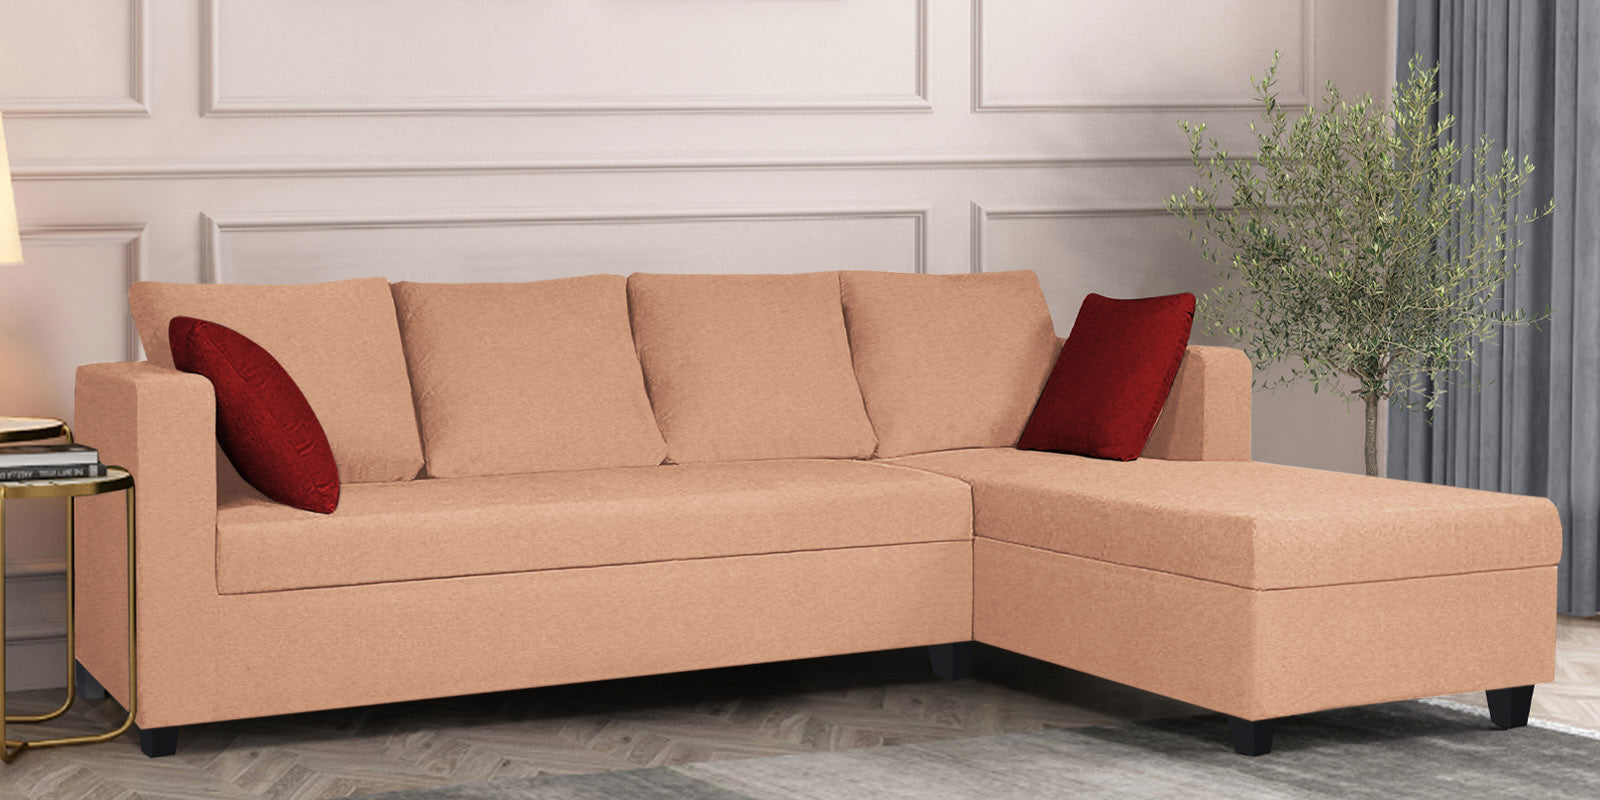 Nebula Fabric LHS Sectional Sofa (3+Lounger) in Cosmic Beige Colour